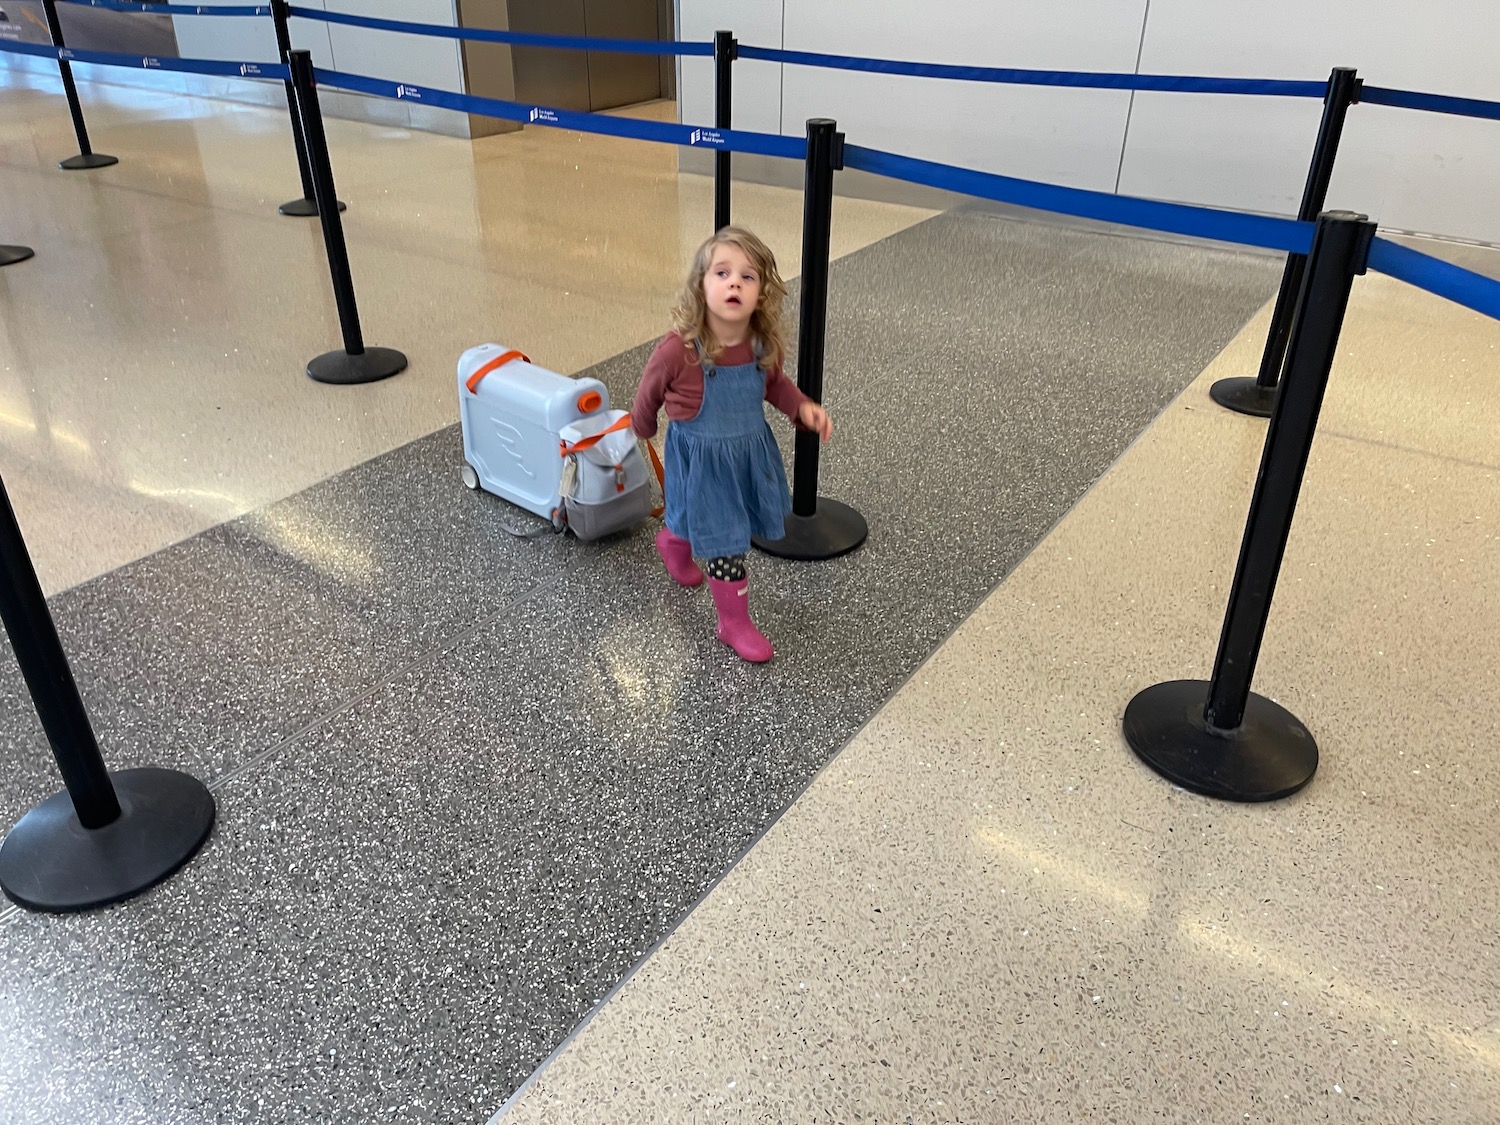 a girl walking with luggage in an airport